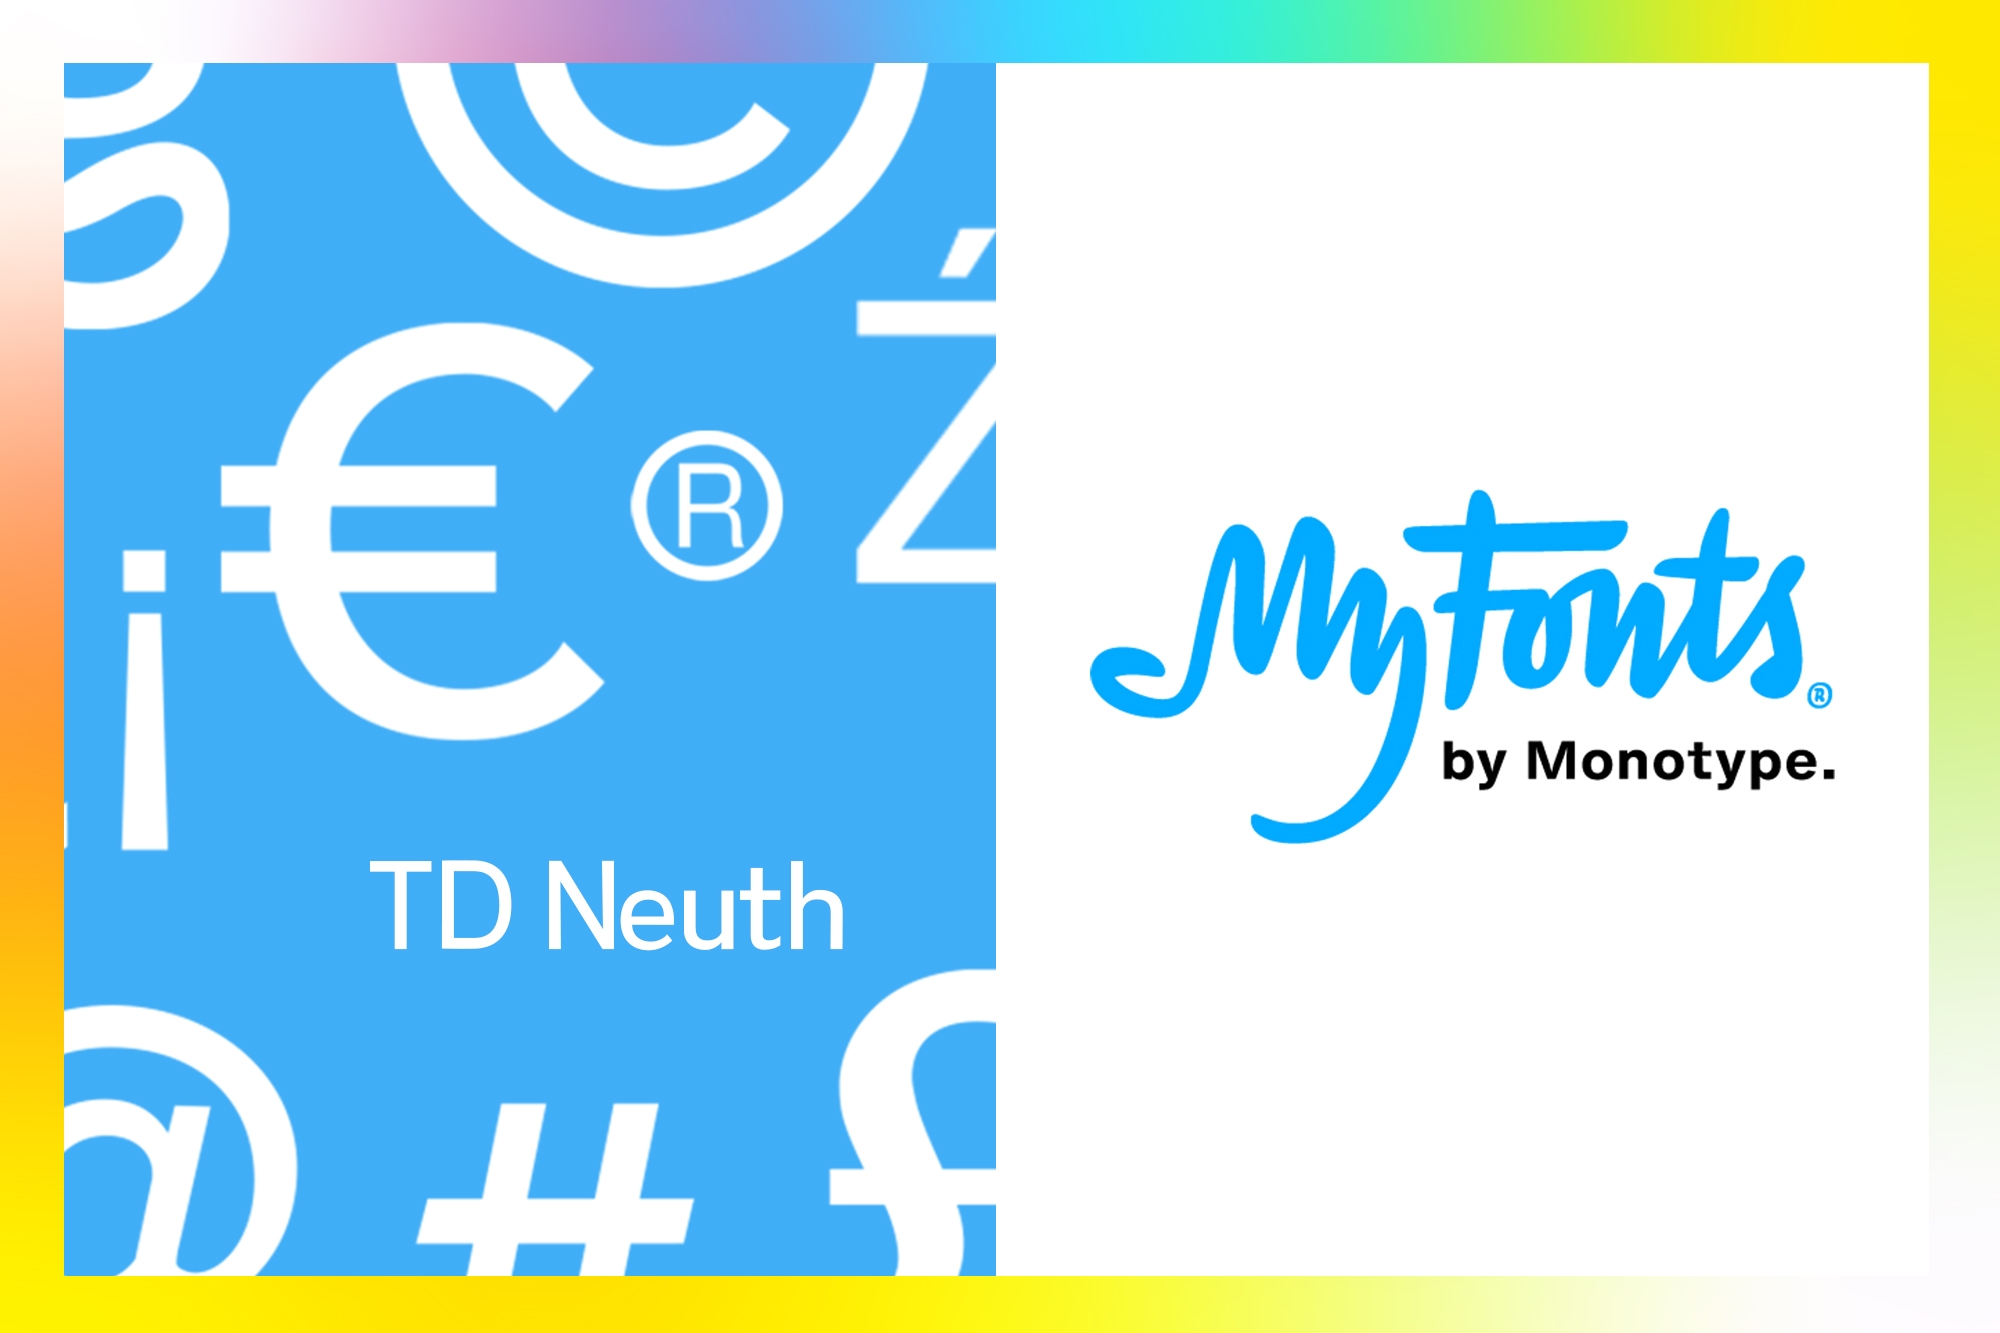 Tribox Design creates a font called TD Neuth on Monotype 